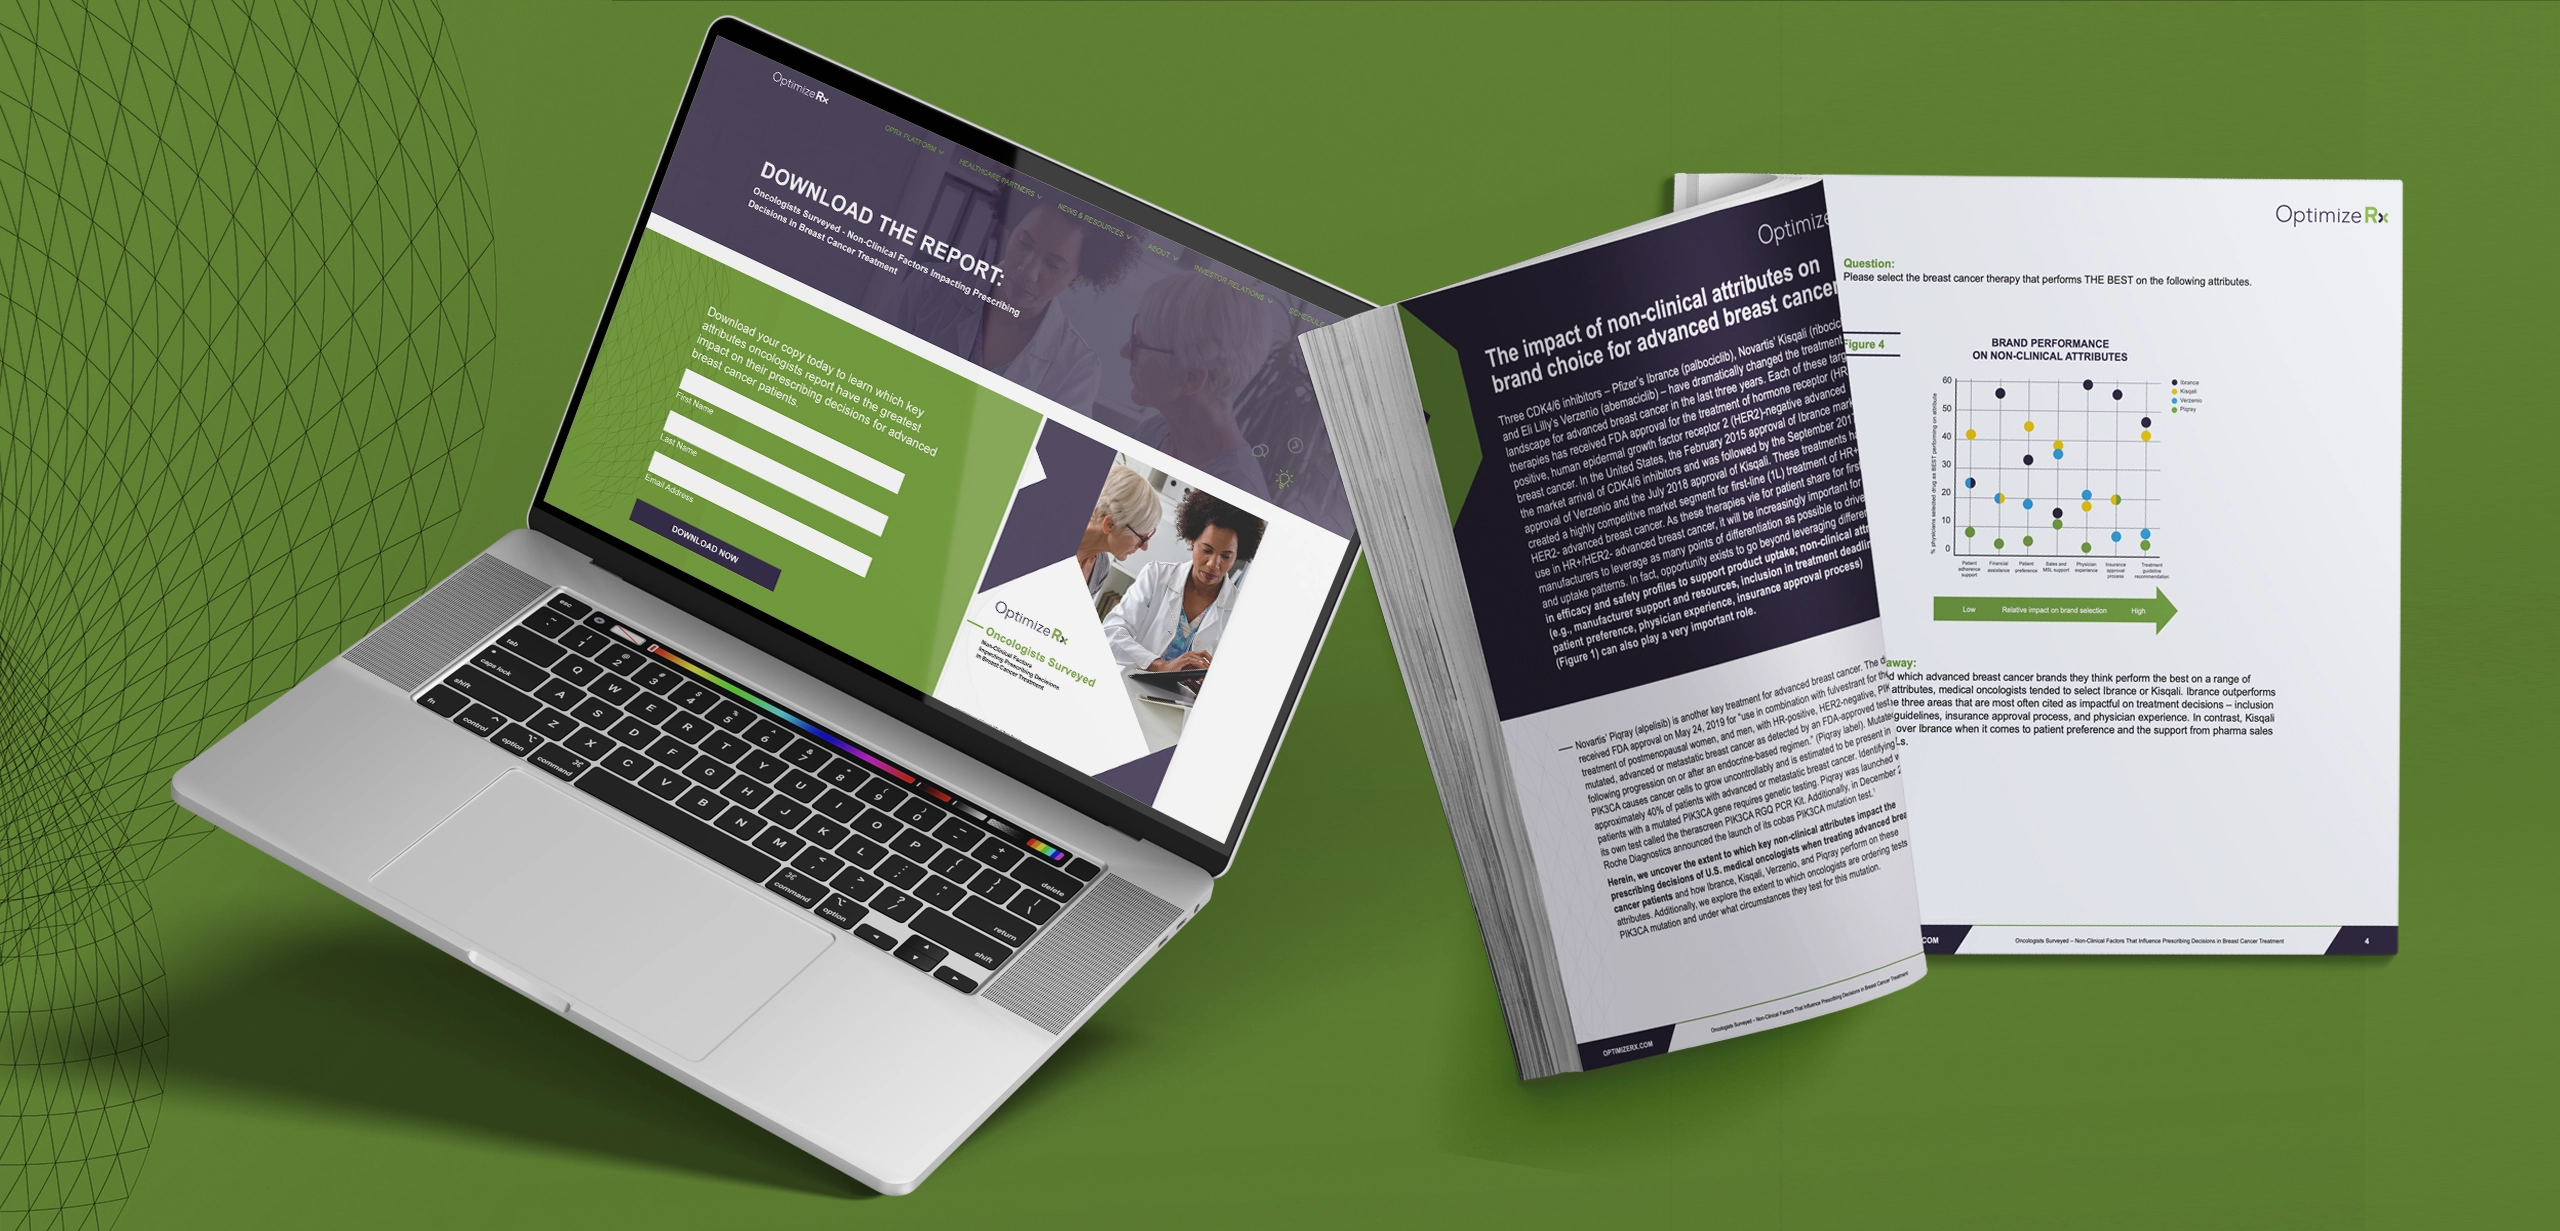 Branding and web design services for healthcare technology company